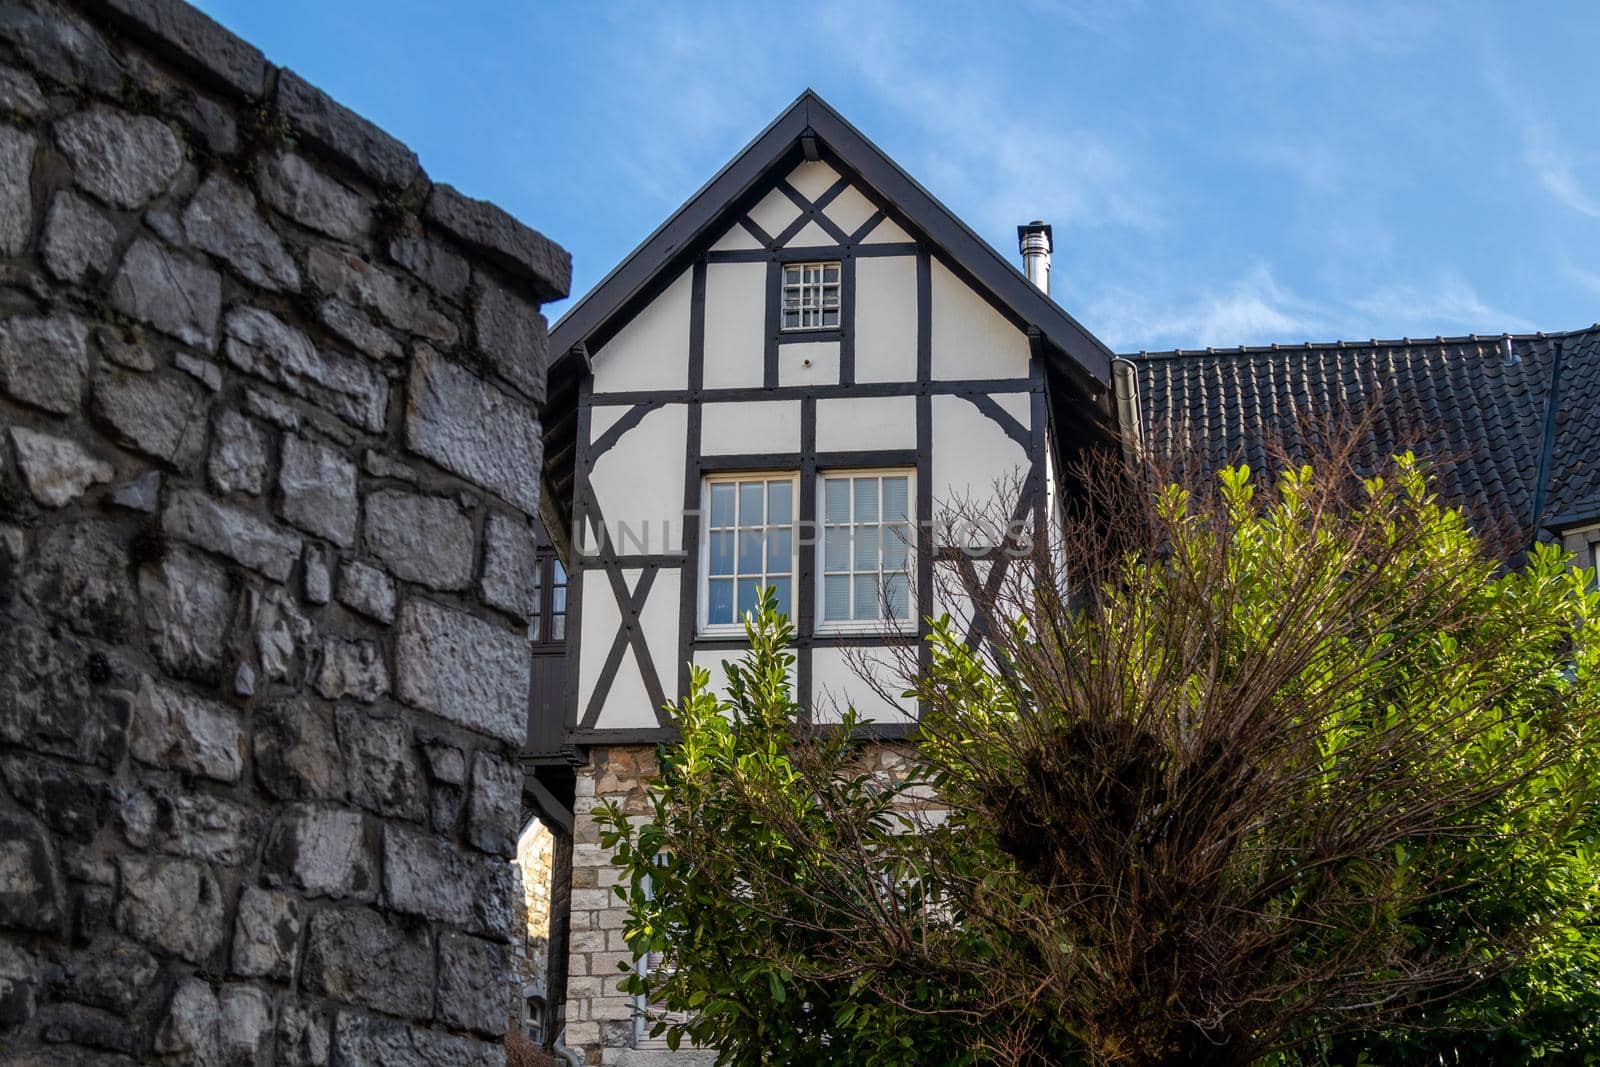 Half-timbered house in the old town of Stolberg, Eifel by reinerc